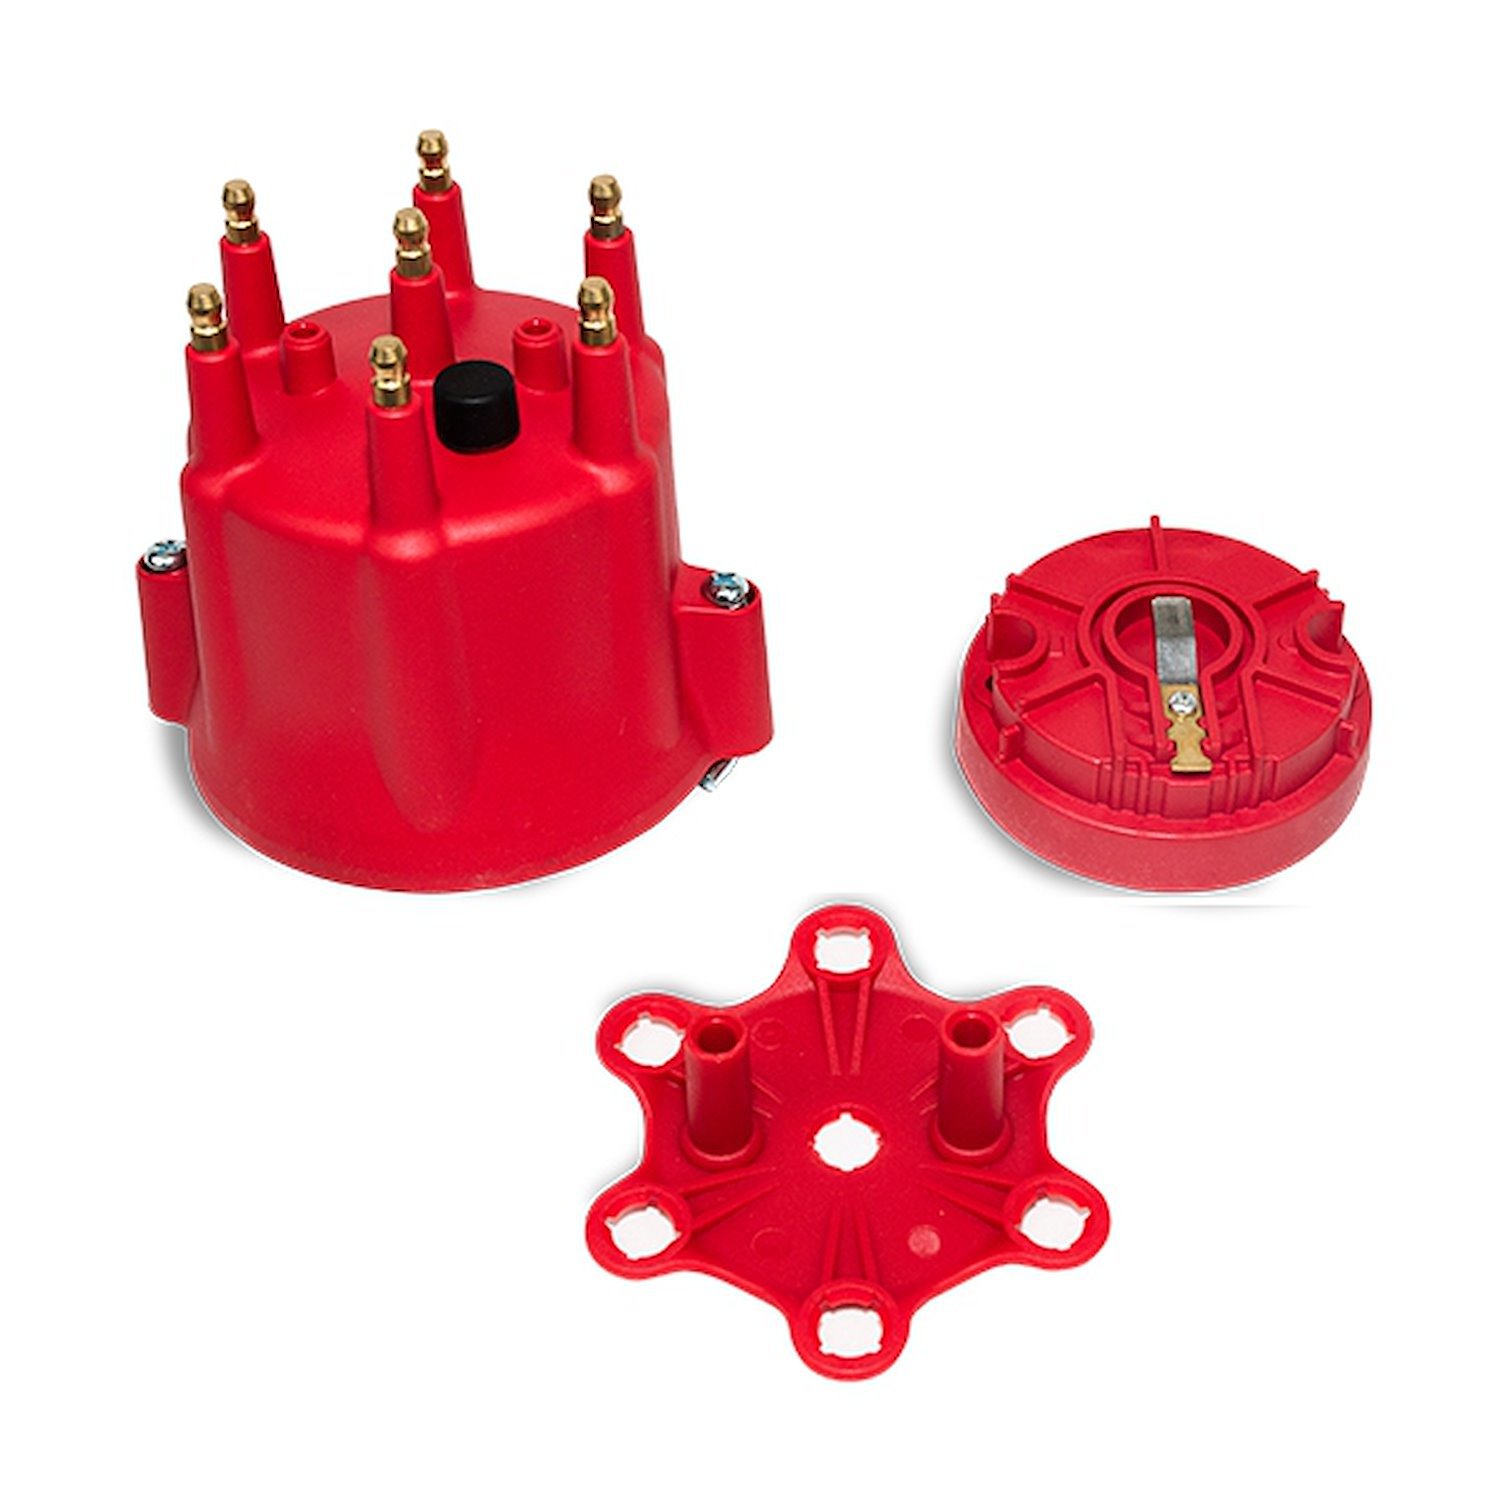 JM6975R Pro Series Distributor Cap and Rotor Kit, 6 Cylinder Male, Red